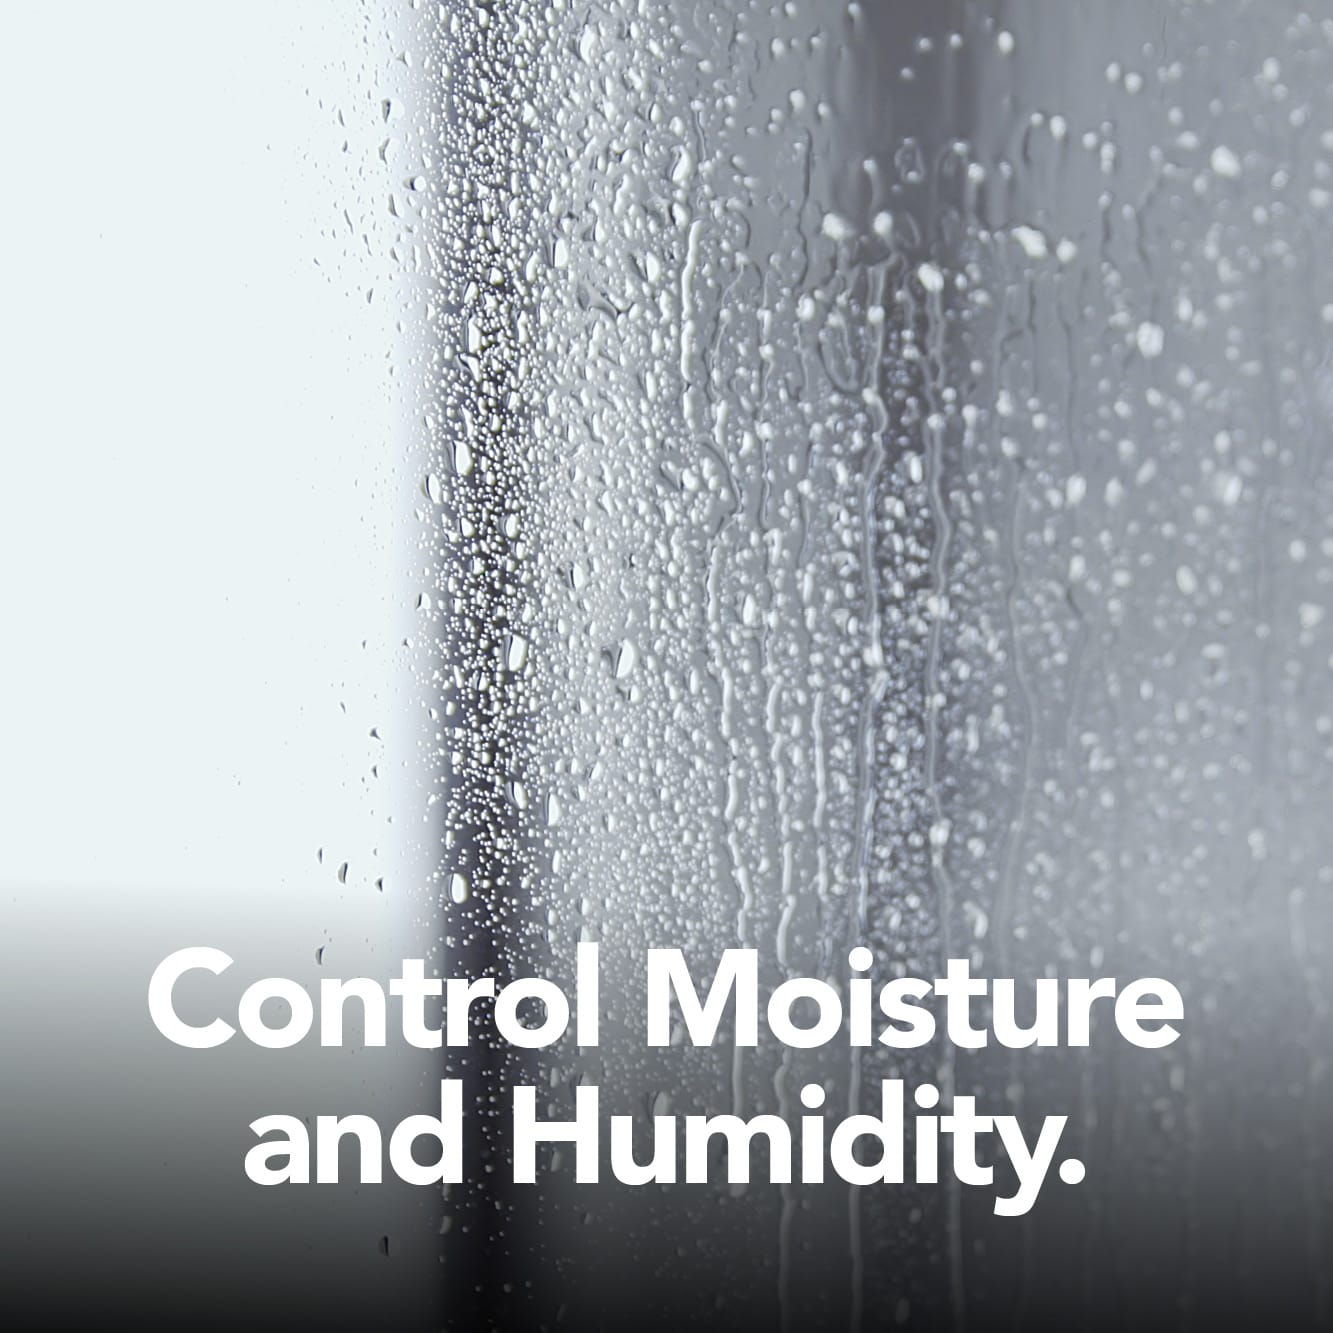 Broan-NuTone can help with moisture build up on windows and mirrors.